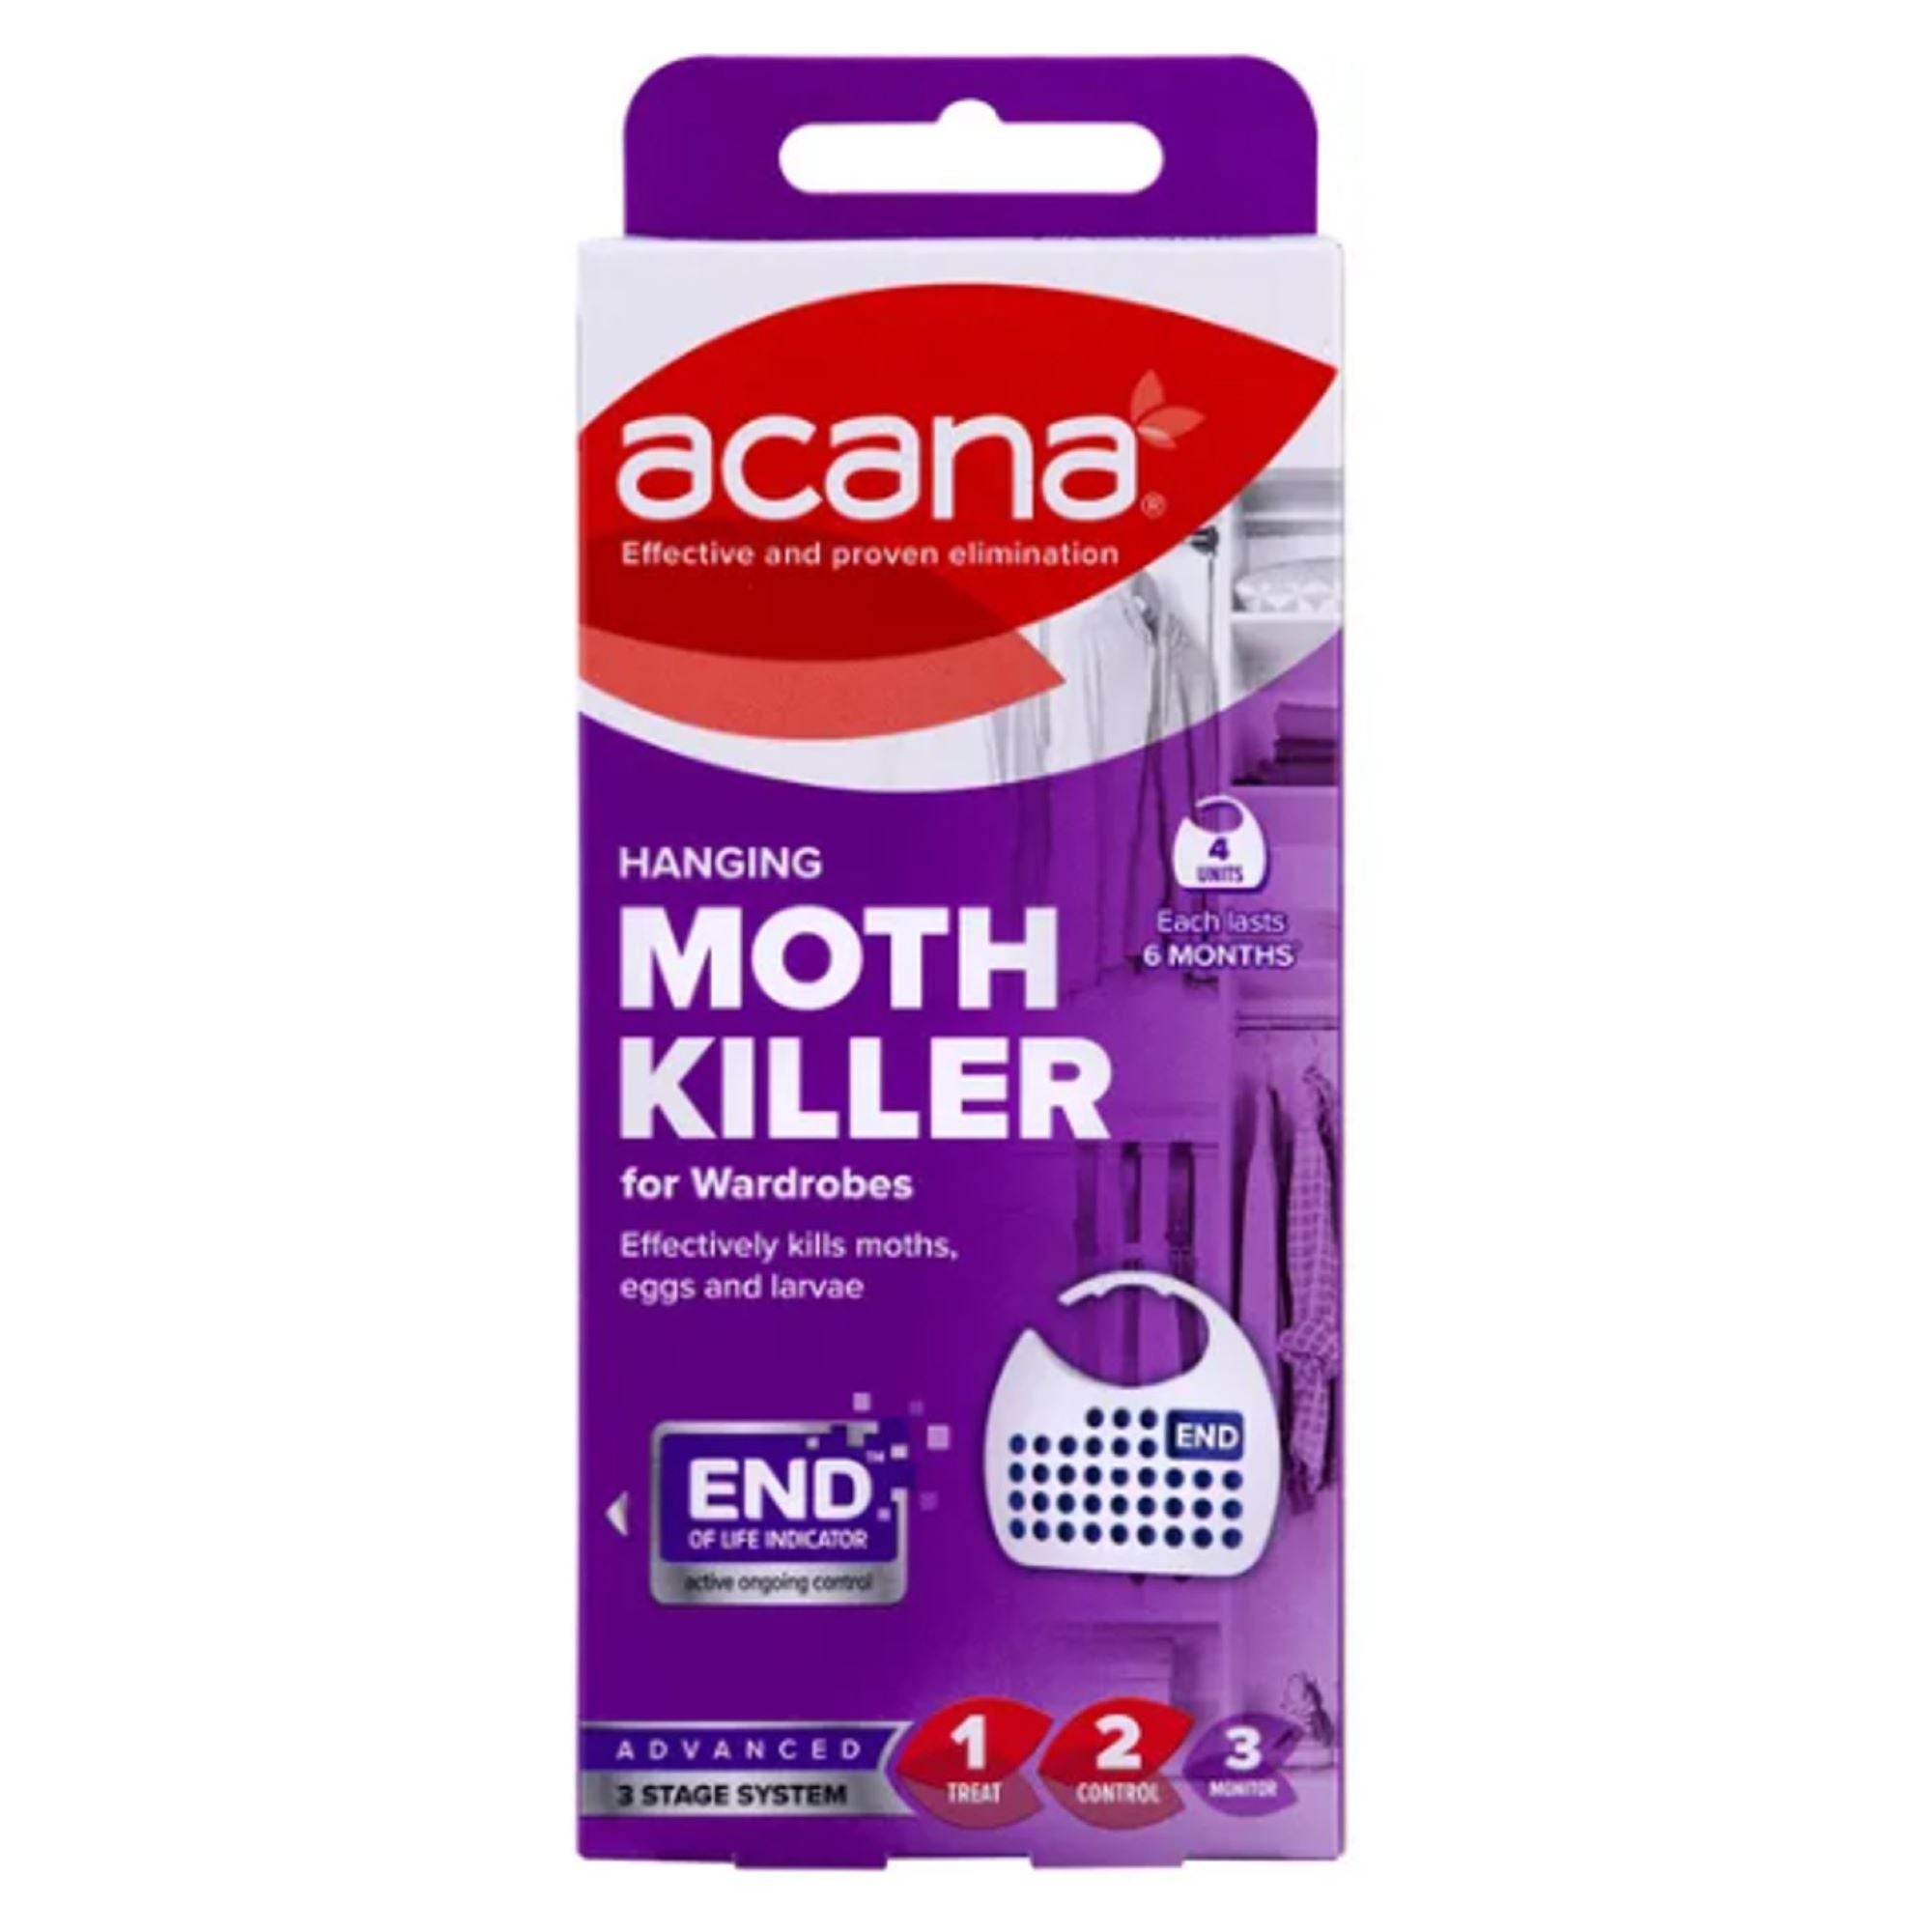 Pack of 4 Hanging Moth Repellent